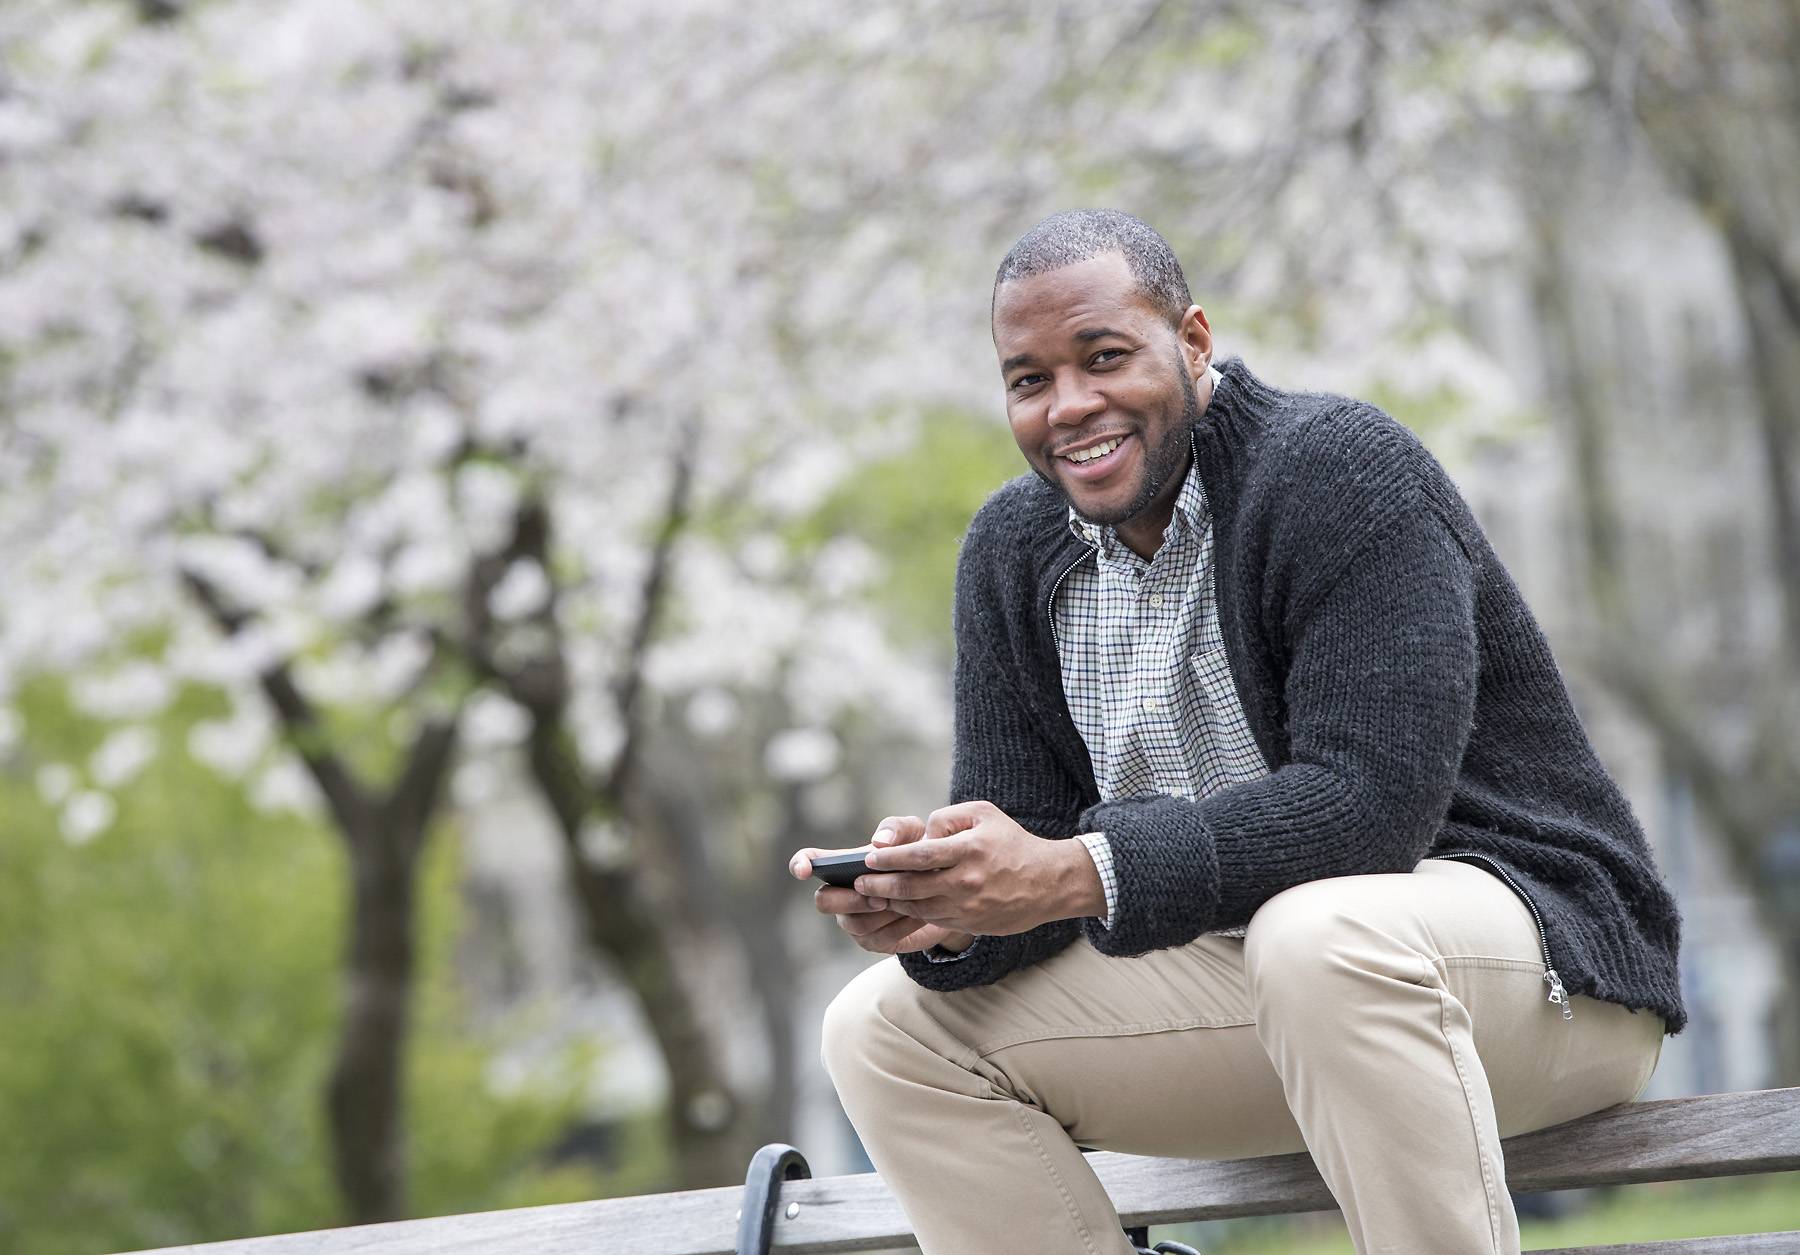 A man sitting on a bench in the park, holding a phone